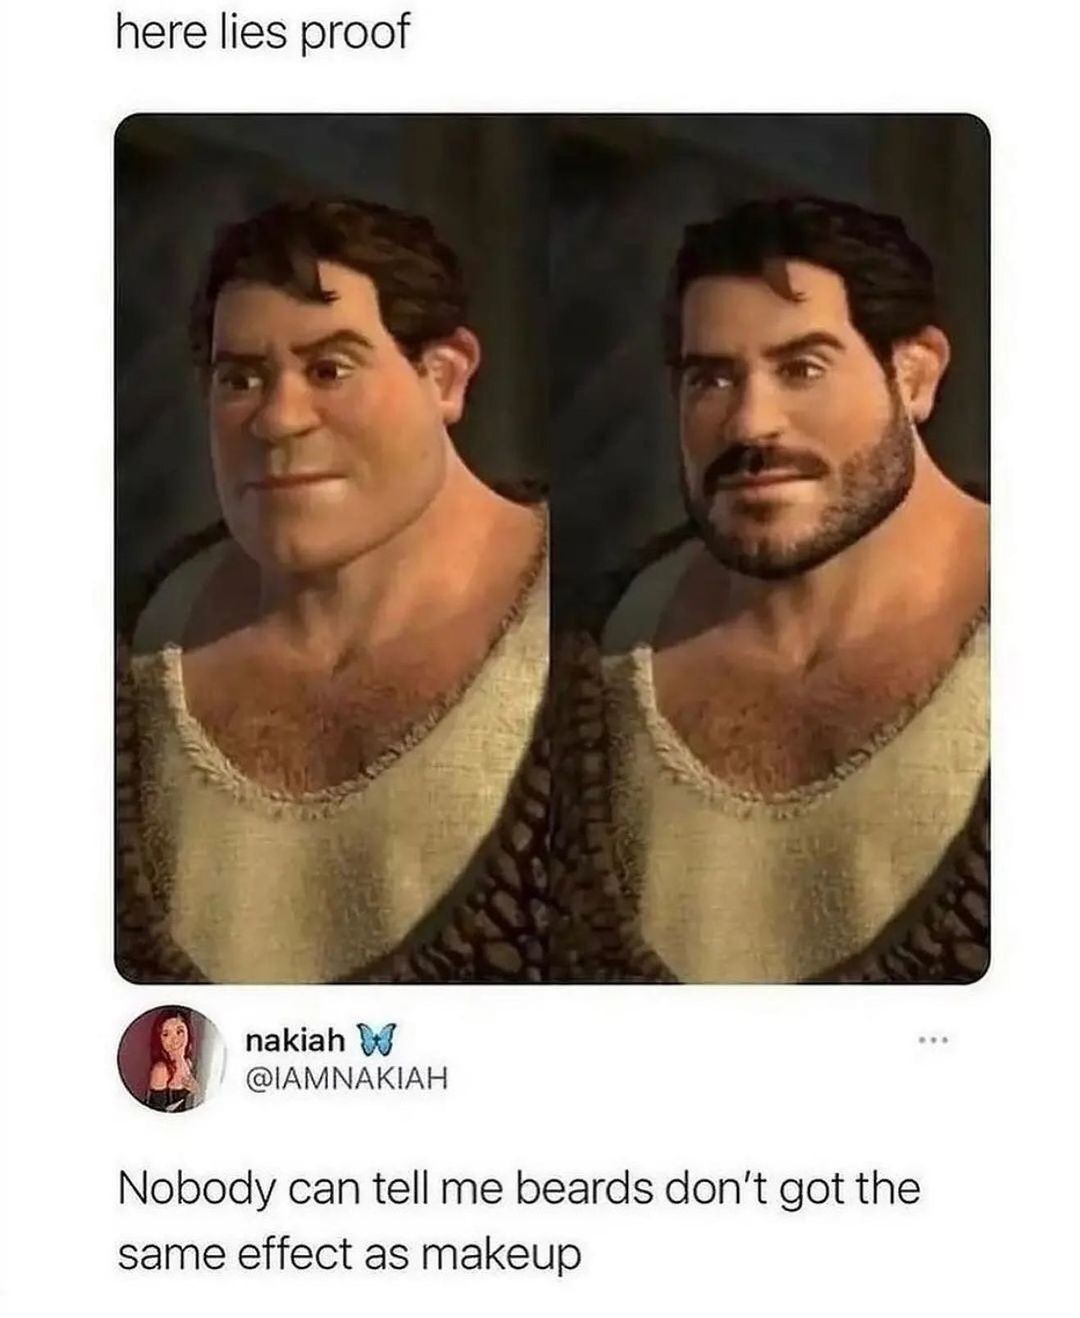 Shrek is Life. .. Just wanted to point out the nose, cheekbones, and laugh lines have all been edited as well. In case they thought we wouldn’t notice.